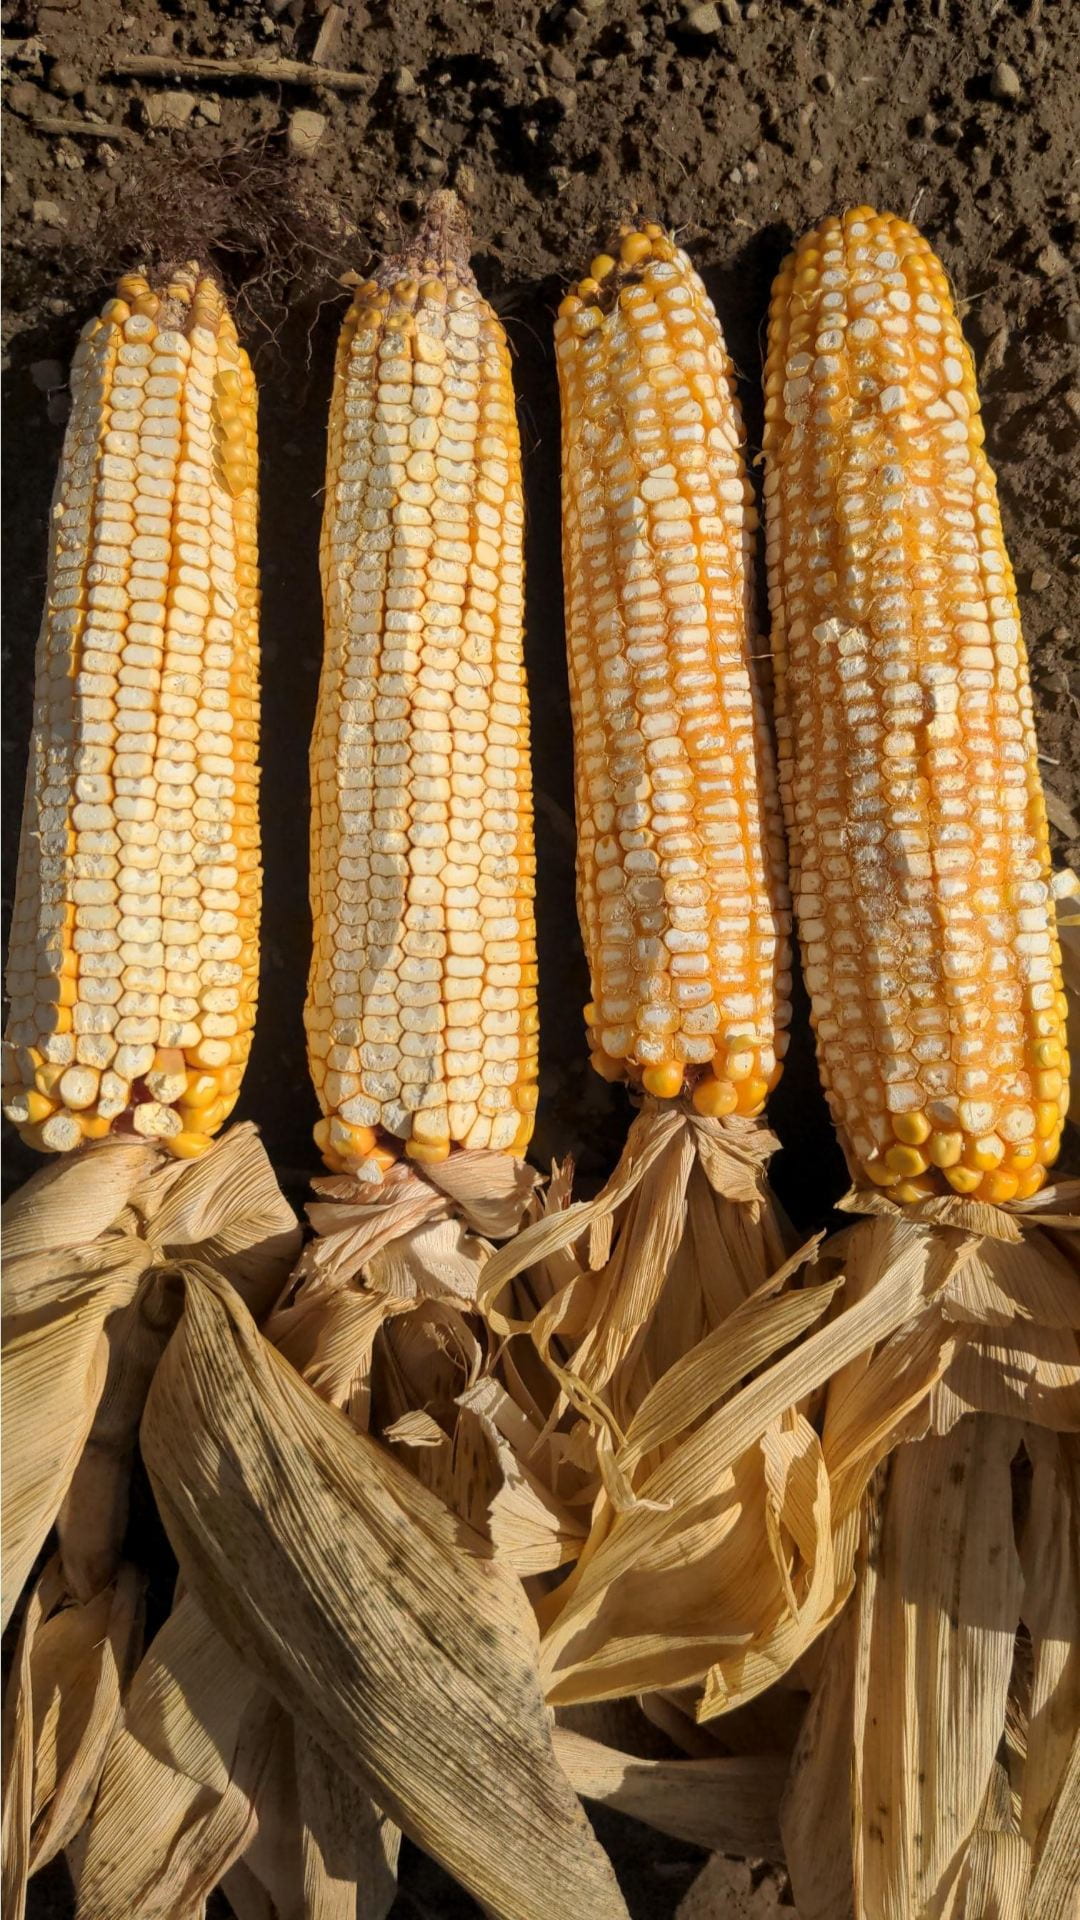 four ears of processed corn